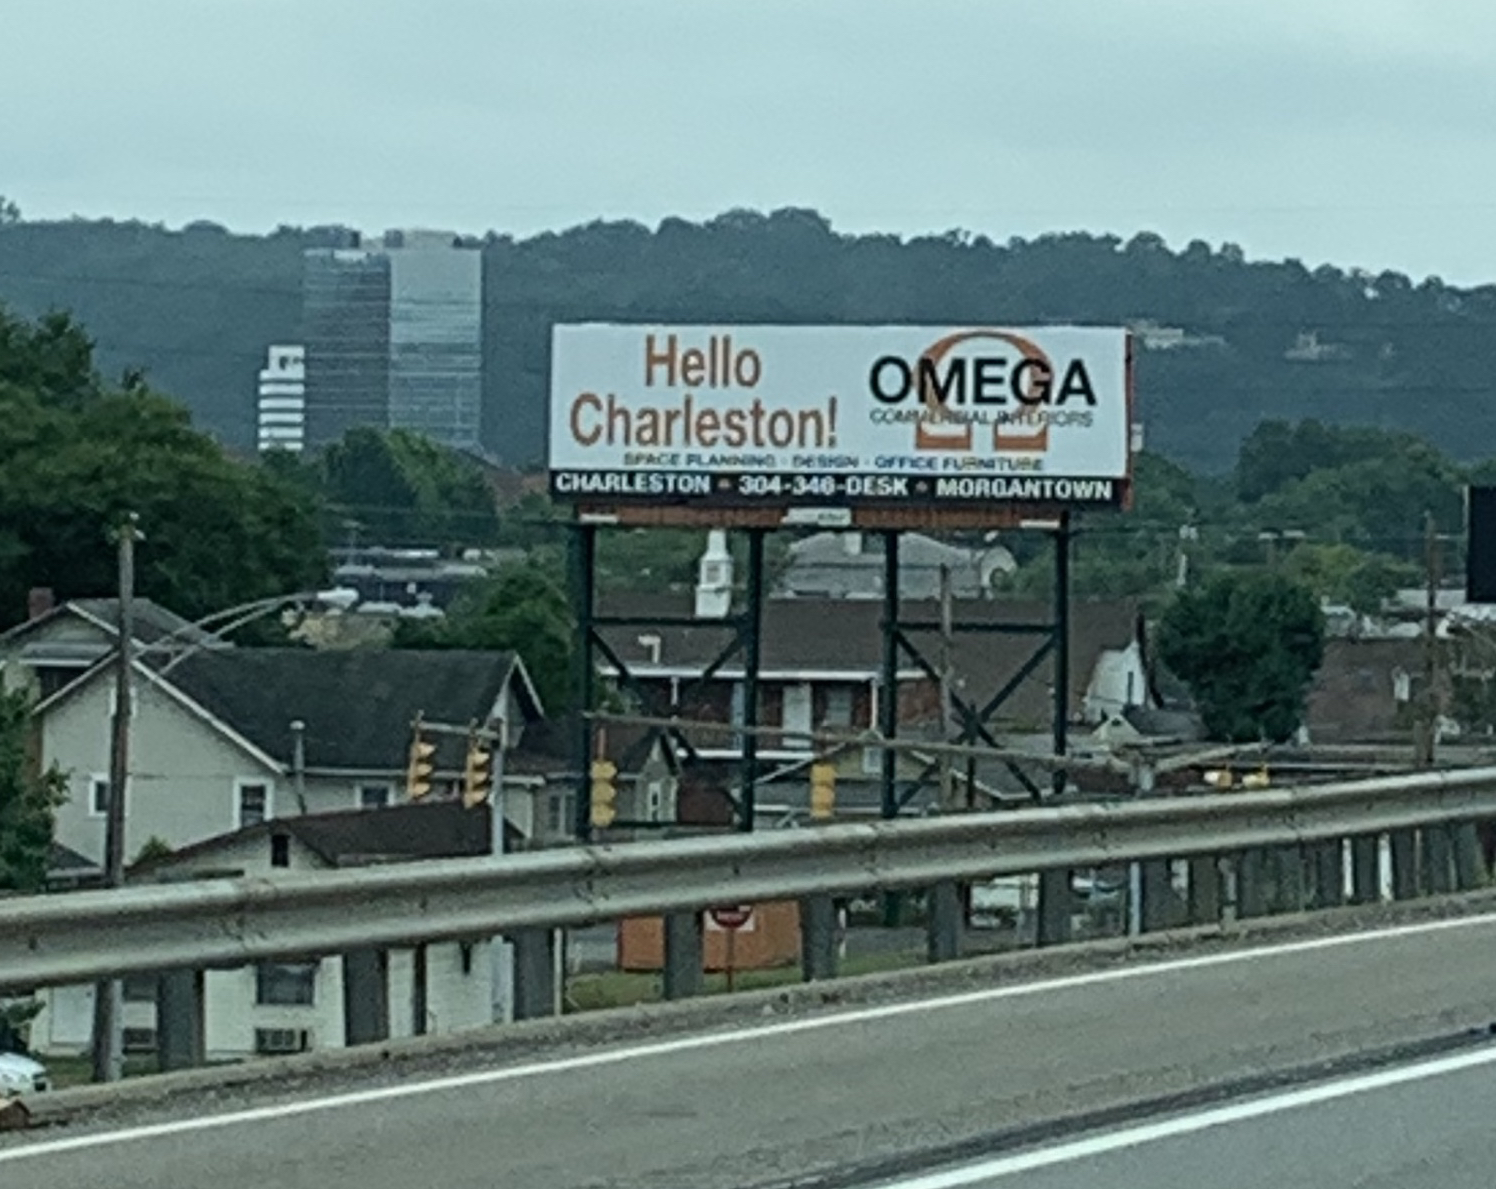 Omega Announces A New Location In Charleston Wv Omega